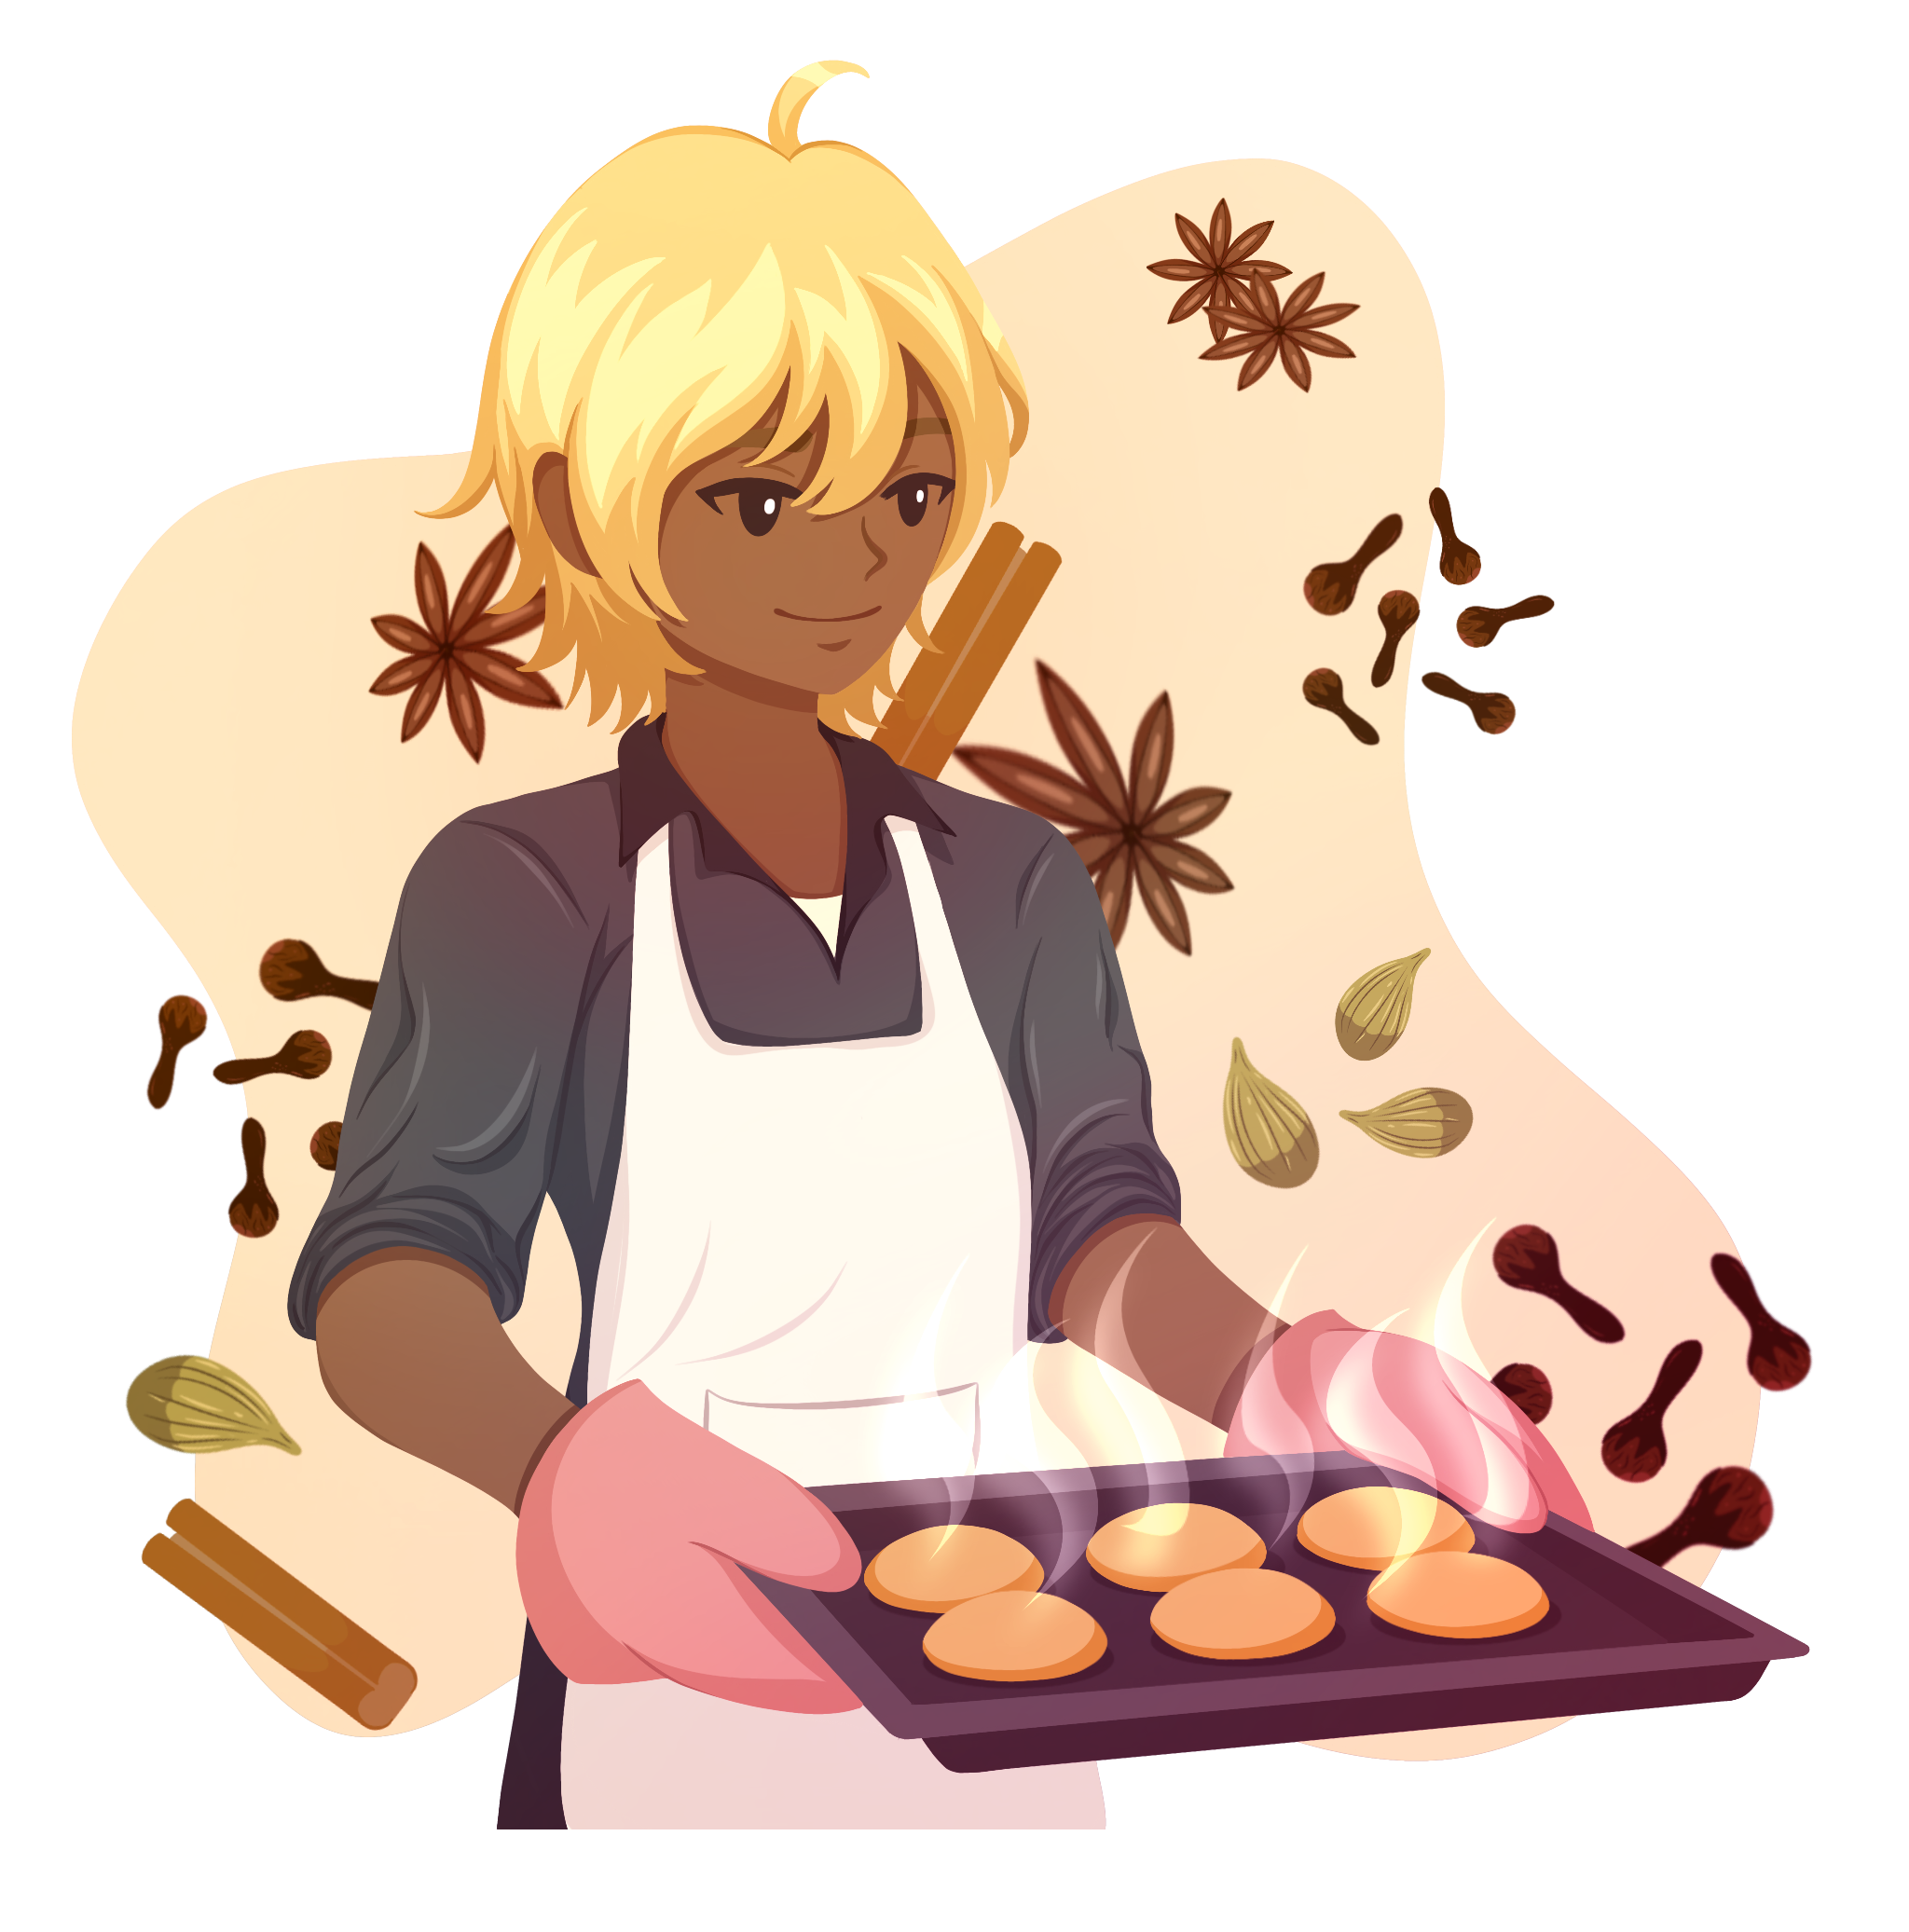 An illustration of a person with baking mitts holding a tray of cookies that are steaming.